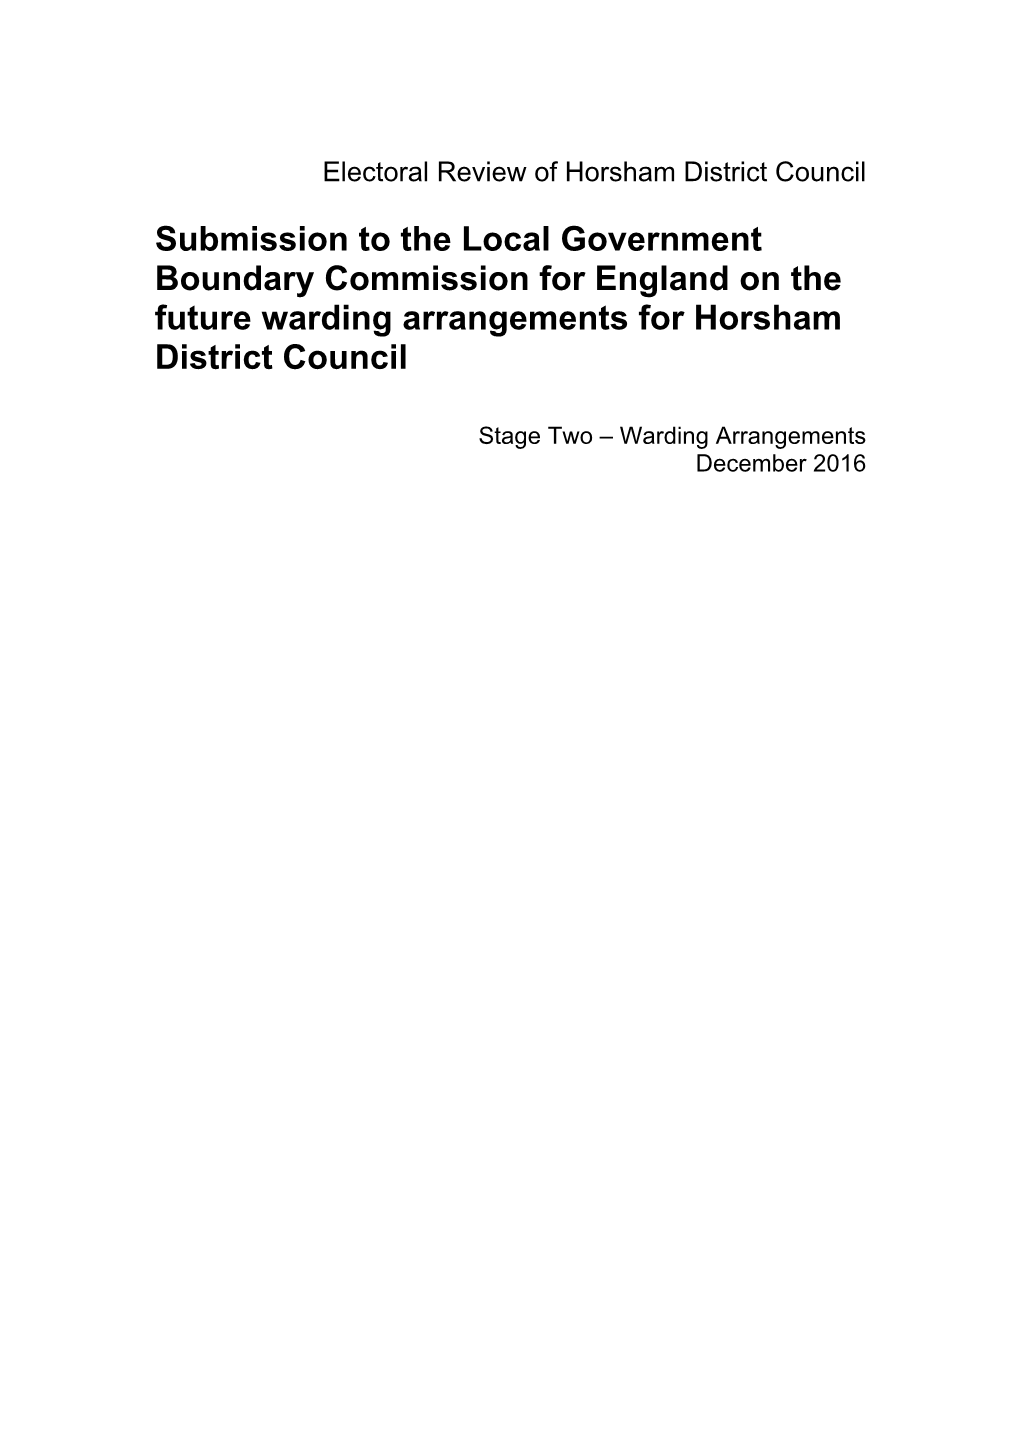 Submission to the Local Government Boundary Commission for England on the Future Warding Arrangements for Horsham District Council